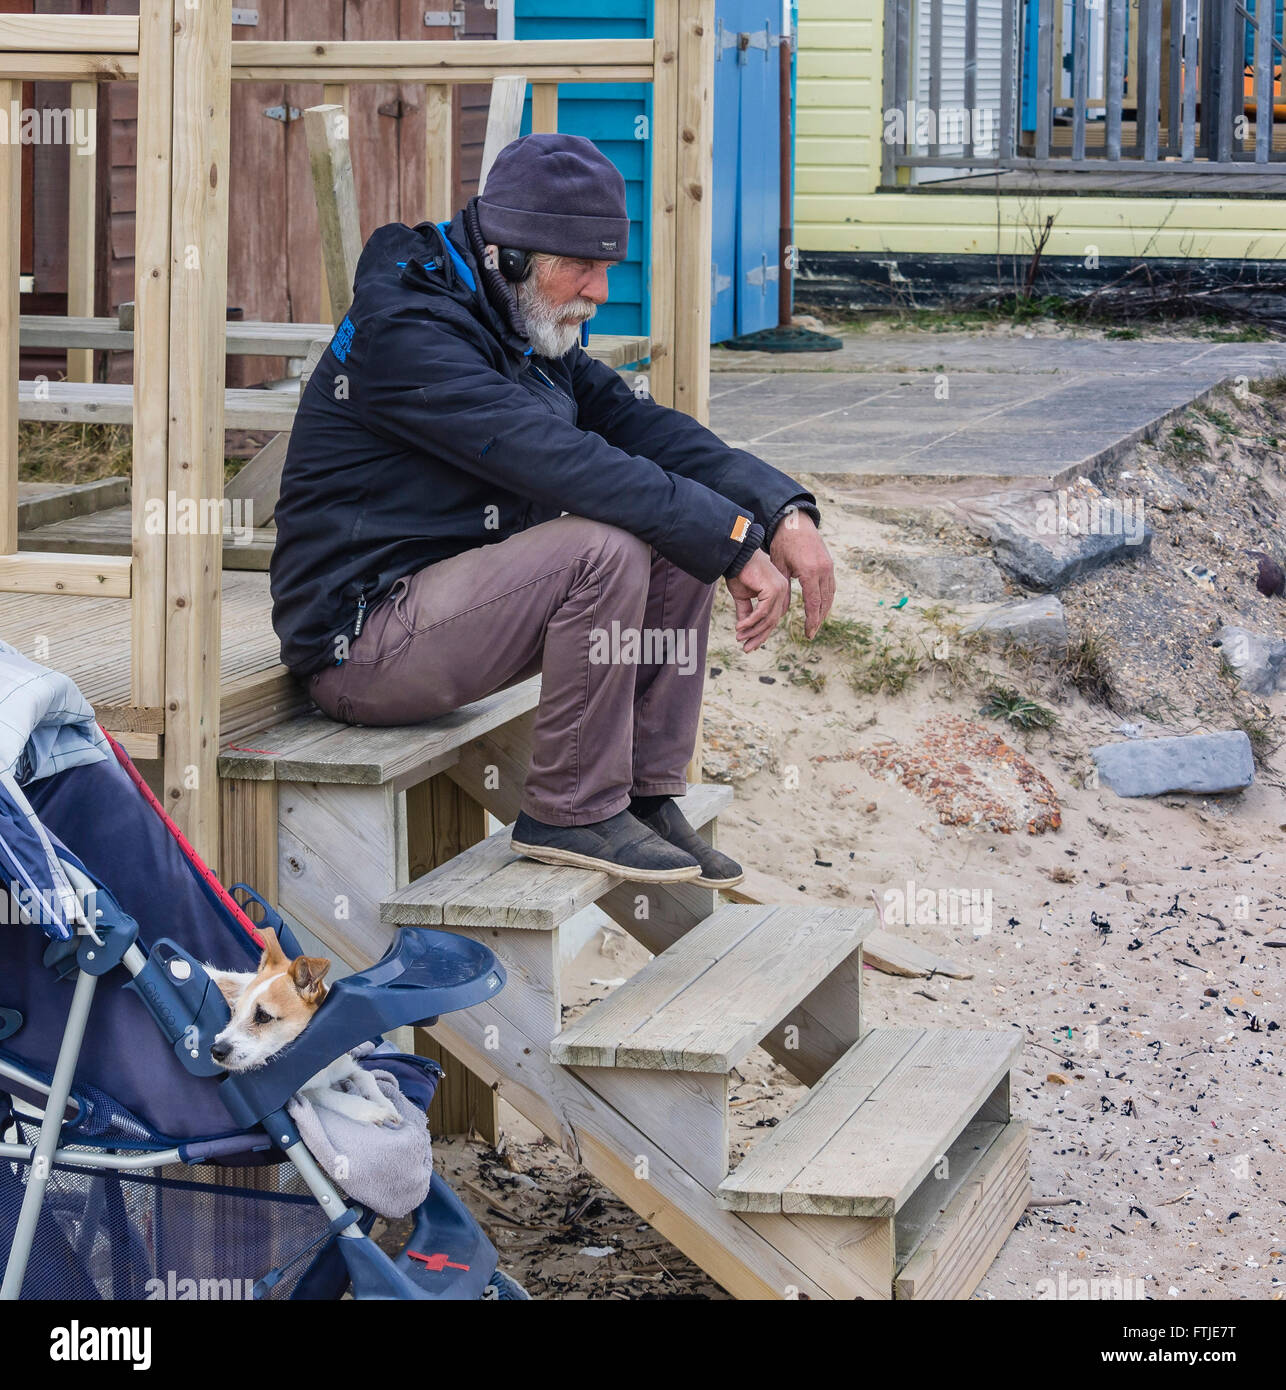 A mature man sitting on steps in a thoughtful mode with his dog, Jack Russell Terrier, alongside. Stock Photo